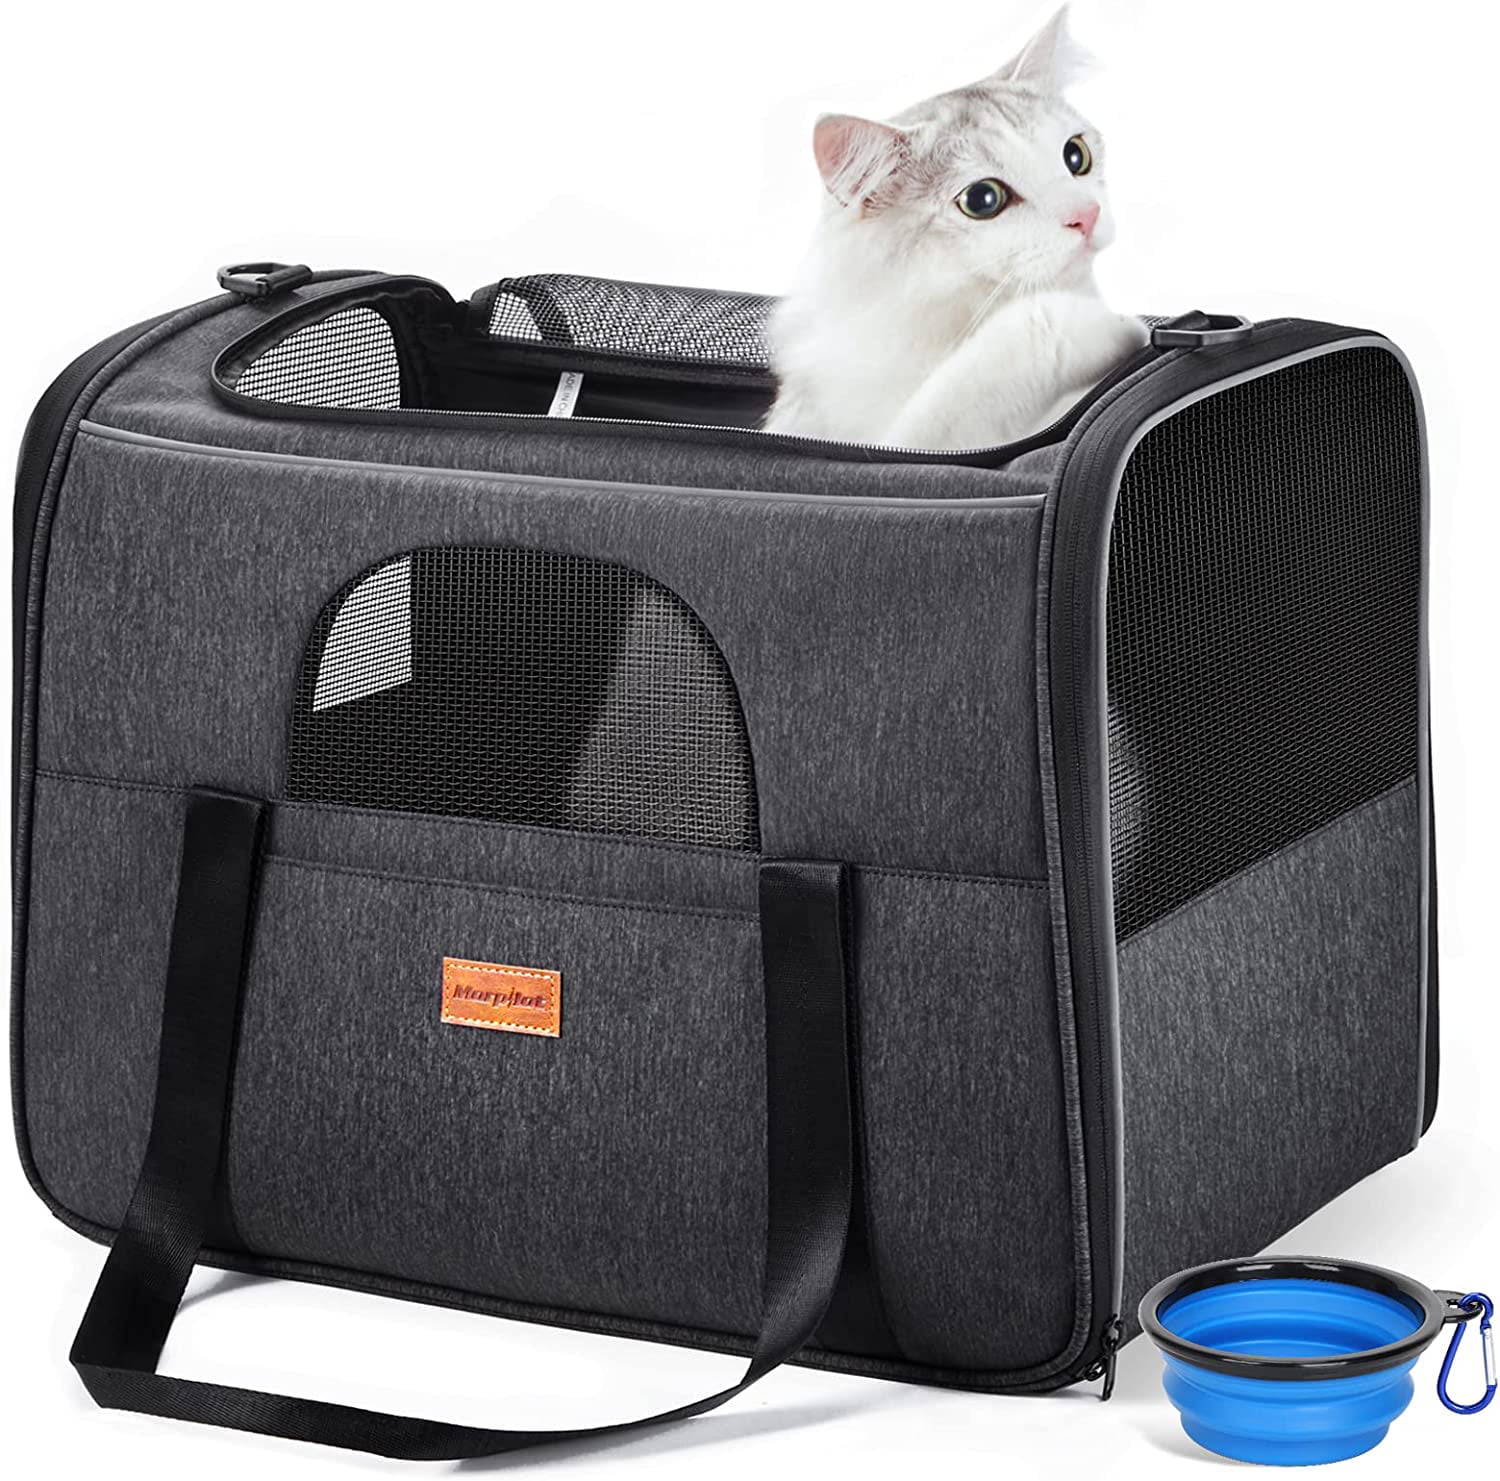 Extra Large Gray Cat Carrier with Bowl